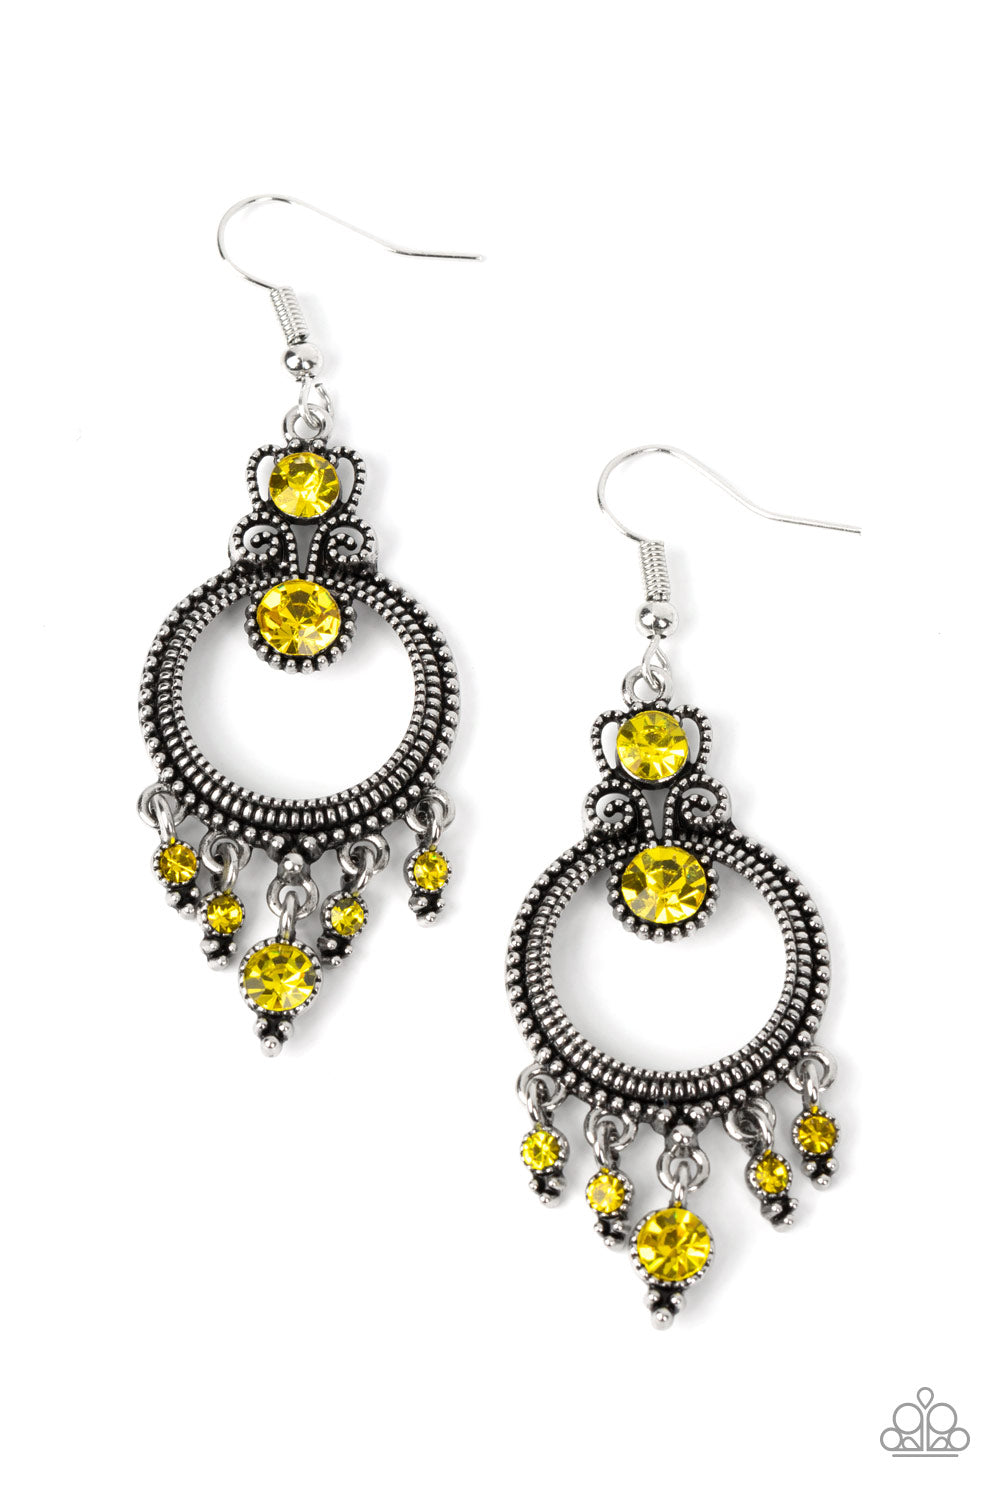 Palace Politics - Yellow Earrings - Paparazzi Accessories - Sparkling with a pair of brilliant yellow rhinestones, a studded filigree accent attaches to the top of a studded silver hoop brimming with antiqued textures. A dainty collection of yellow rhinestones twinkles from the bottom of the frame, resulting in a glittery fringe. Earring attaches to a standard fishhook fitting. Sold as one pair of earrings.